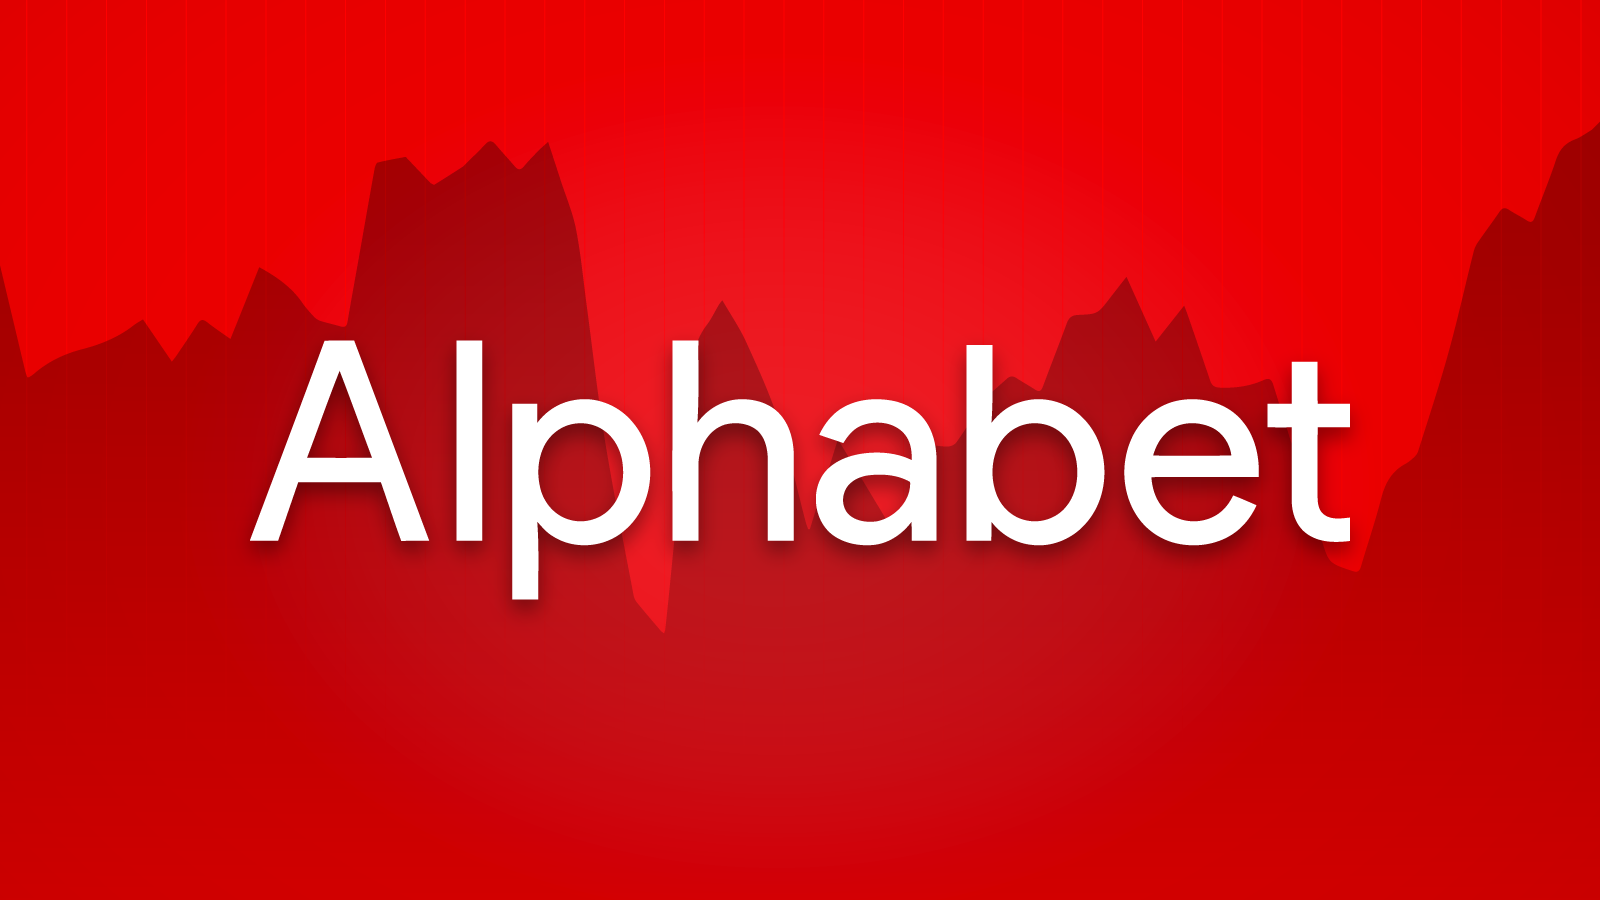 Alphabet's subsidiary plans on expanding services to underdeveloped regions (Credits: TechCrunch)